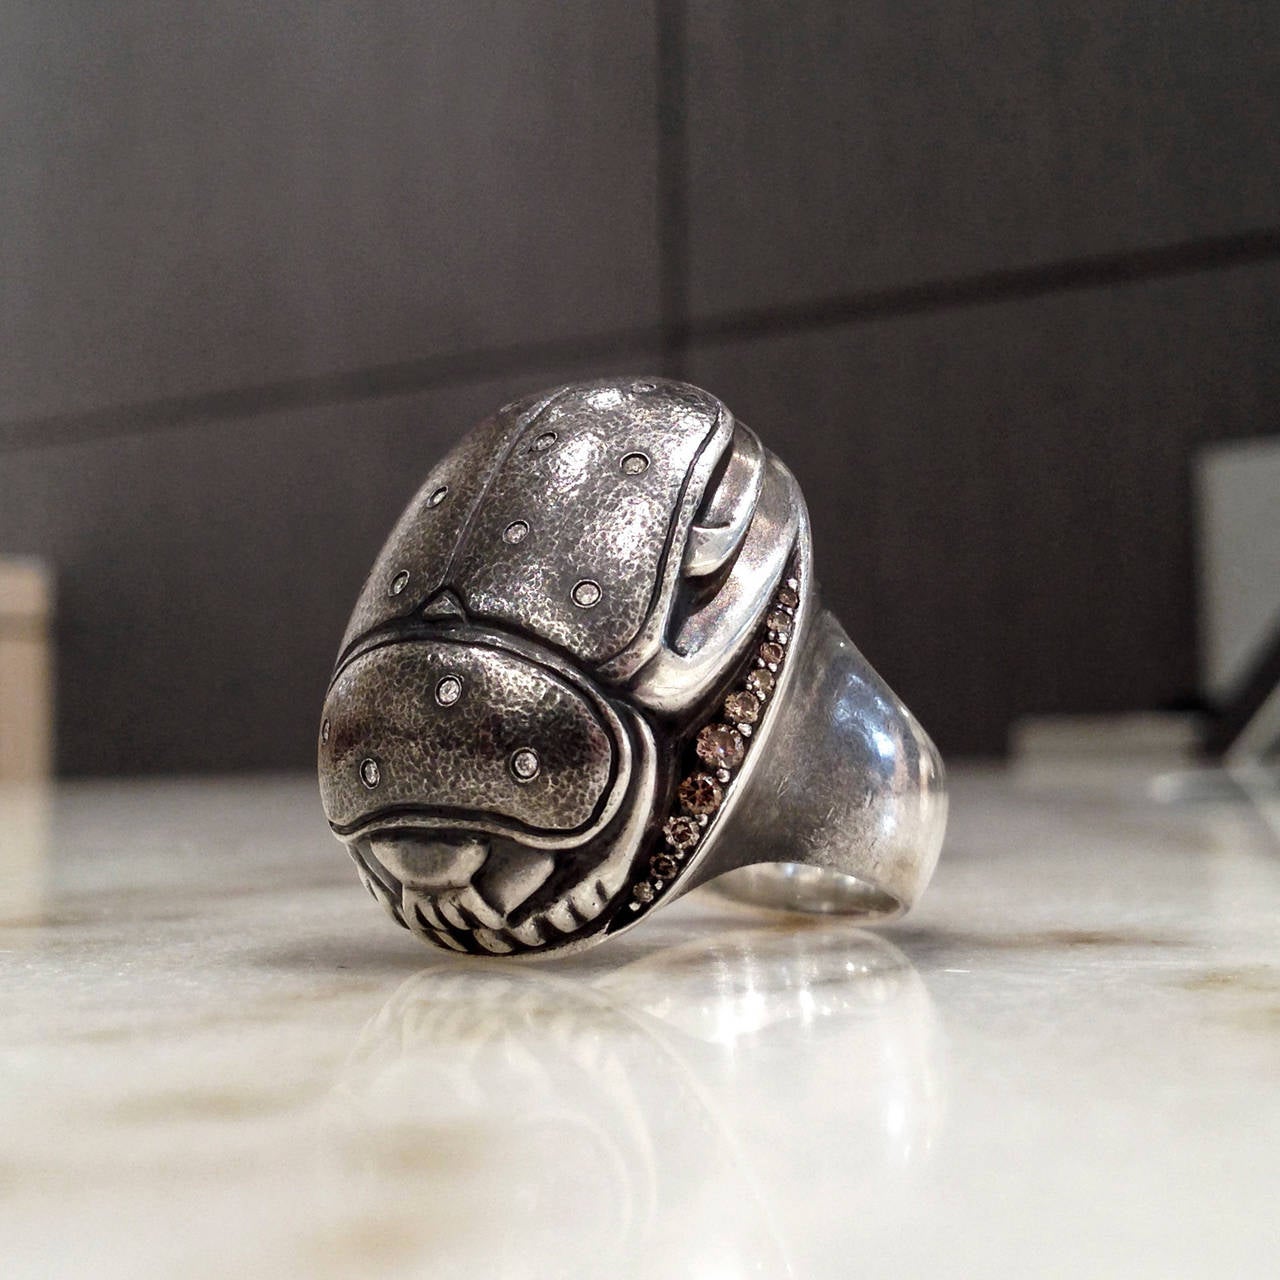 One-of-a-kind Scarab Ring handcrafted in oxidized sterling silver with embedded white, round brilliant-cut diamonds and prong-set cognac diamond side accents. Size 6.5 (Can be Sized).